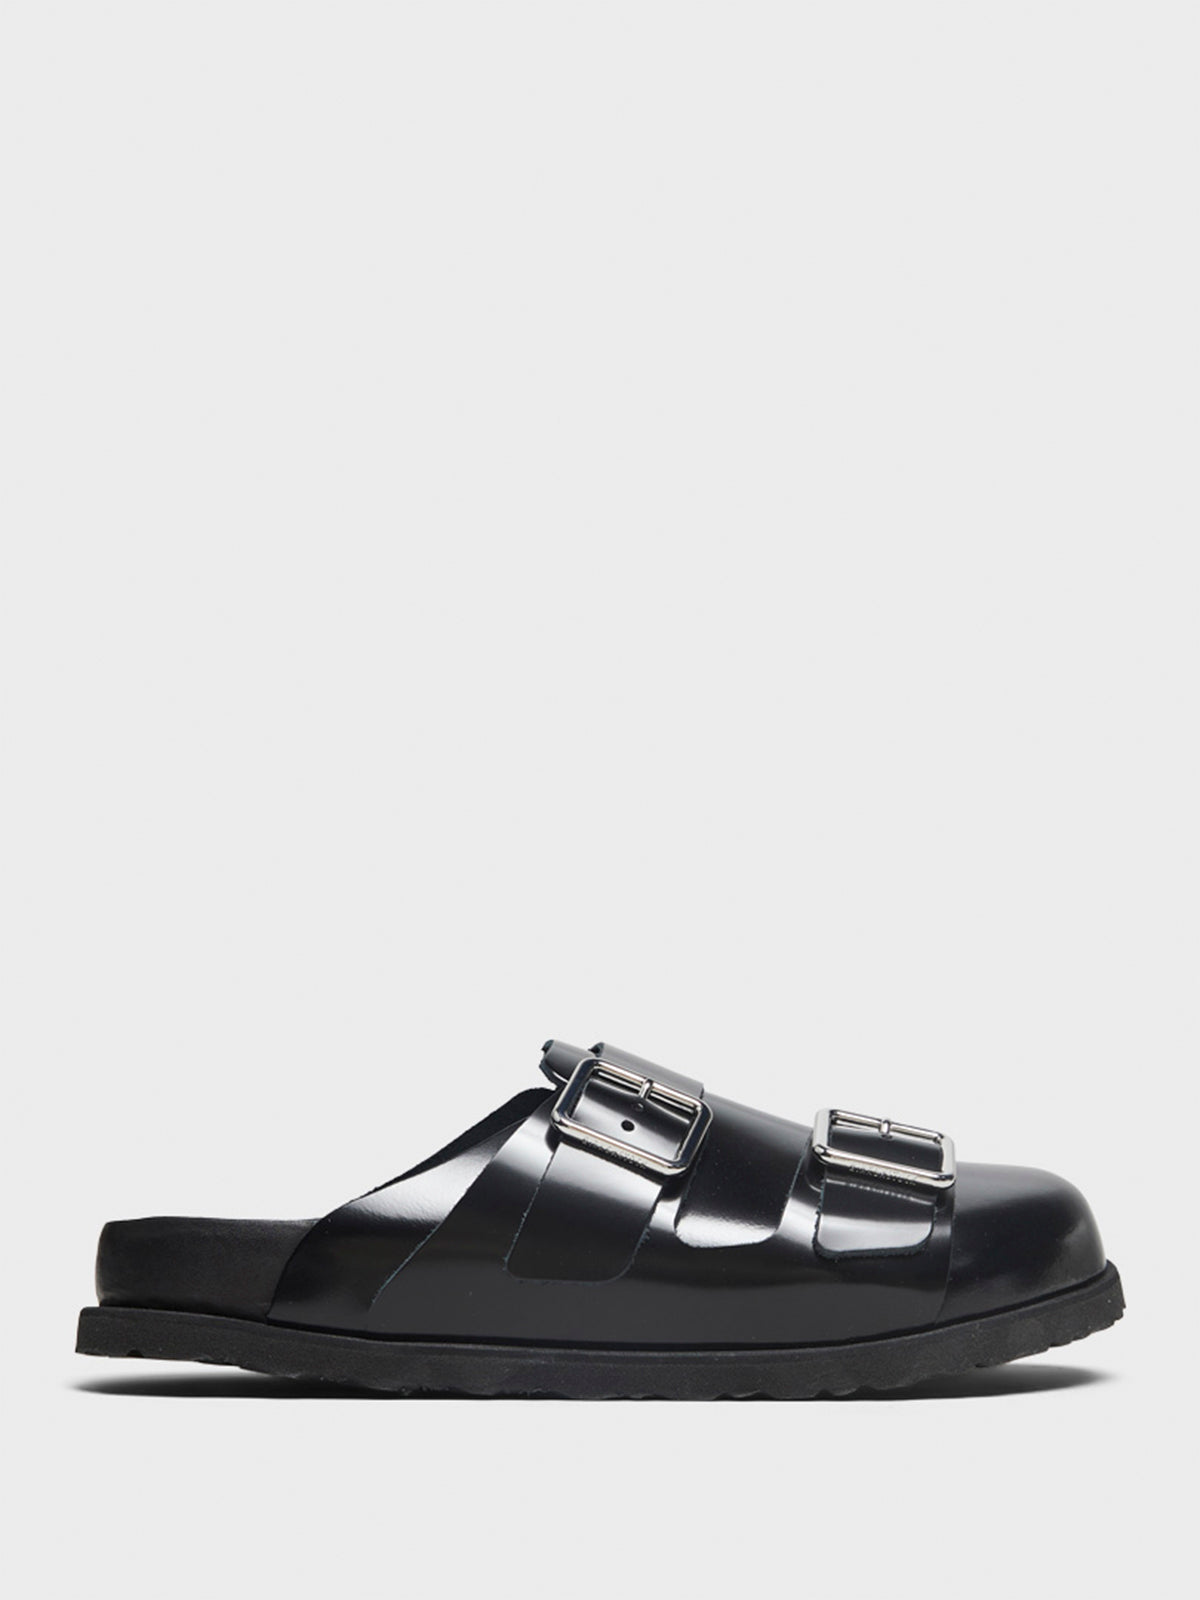 222 West Shiny Leather Sandals in Black